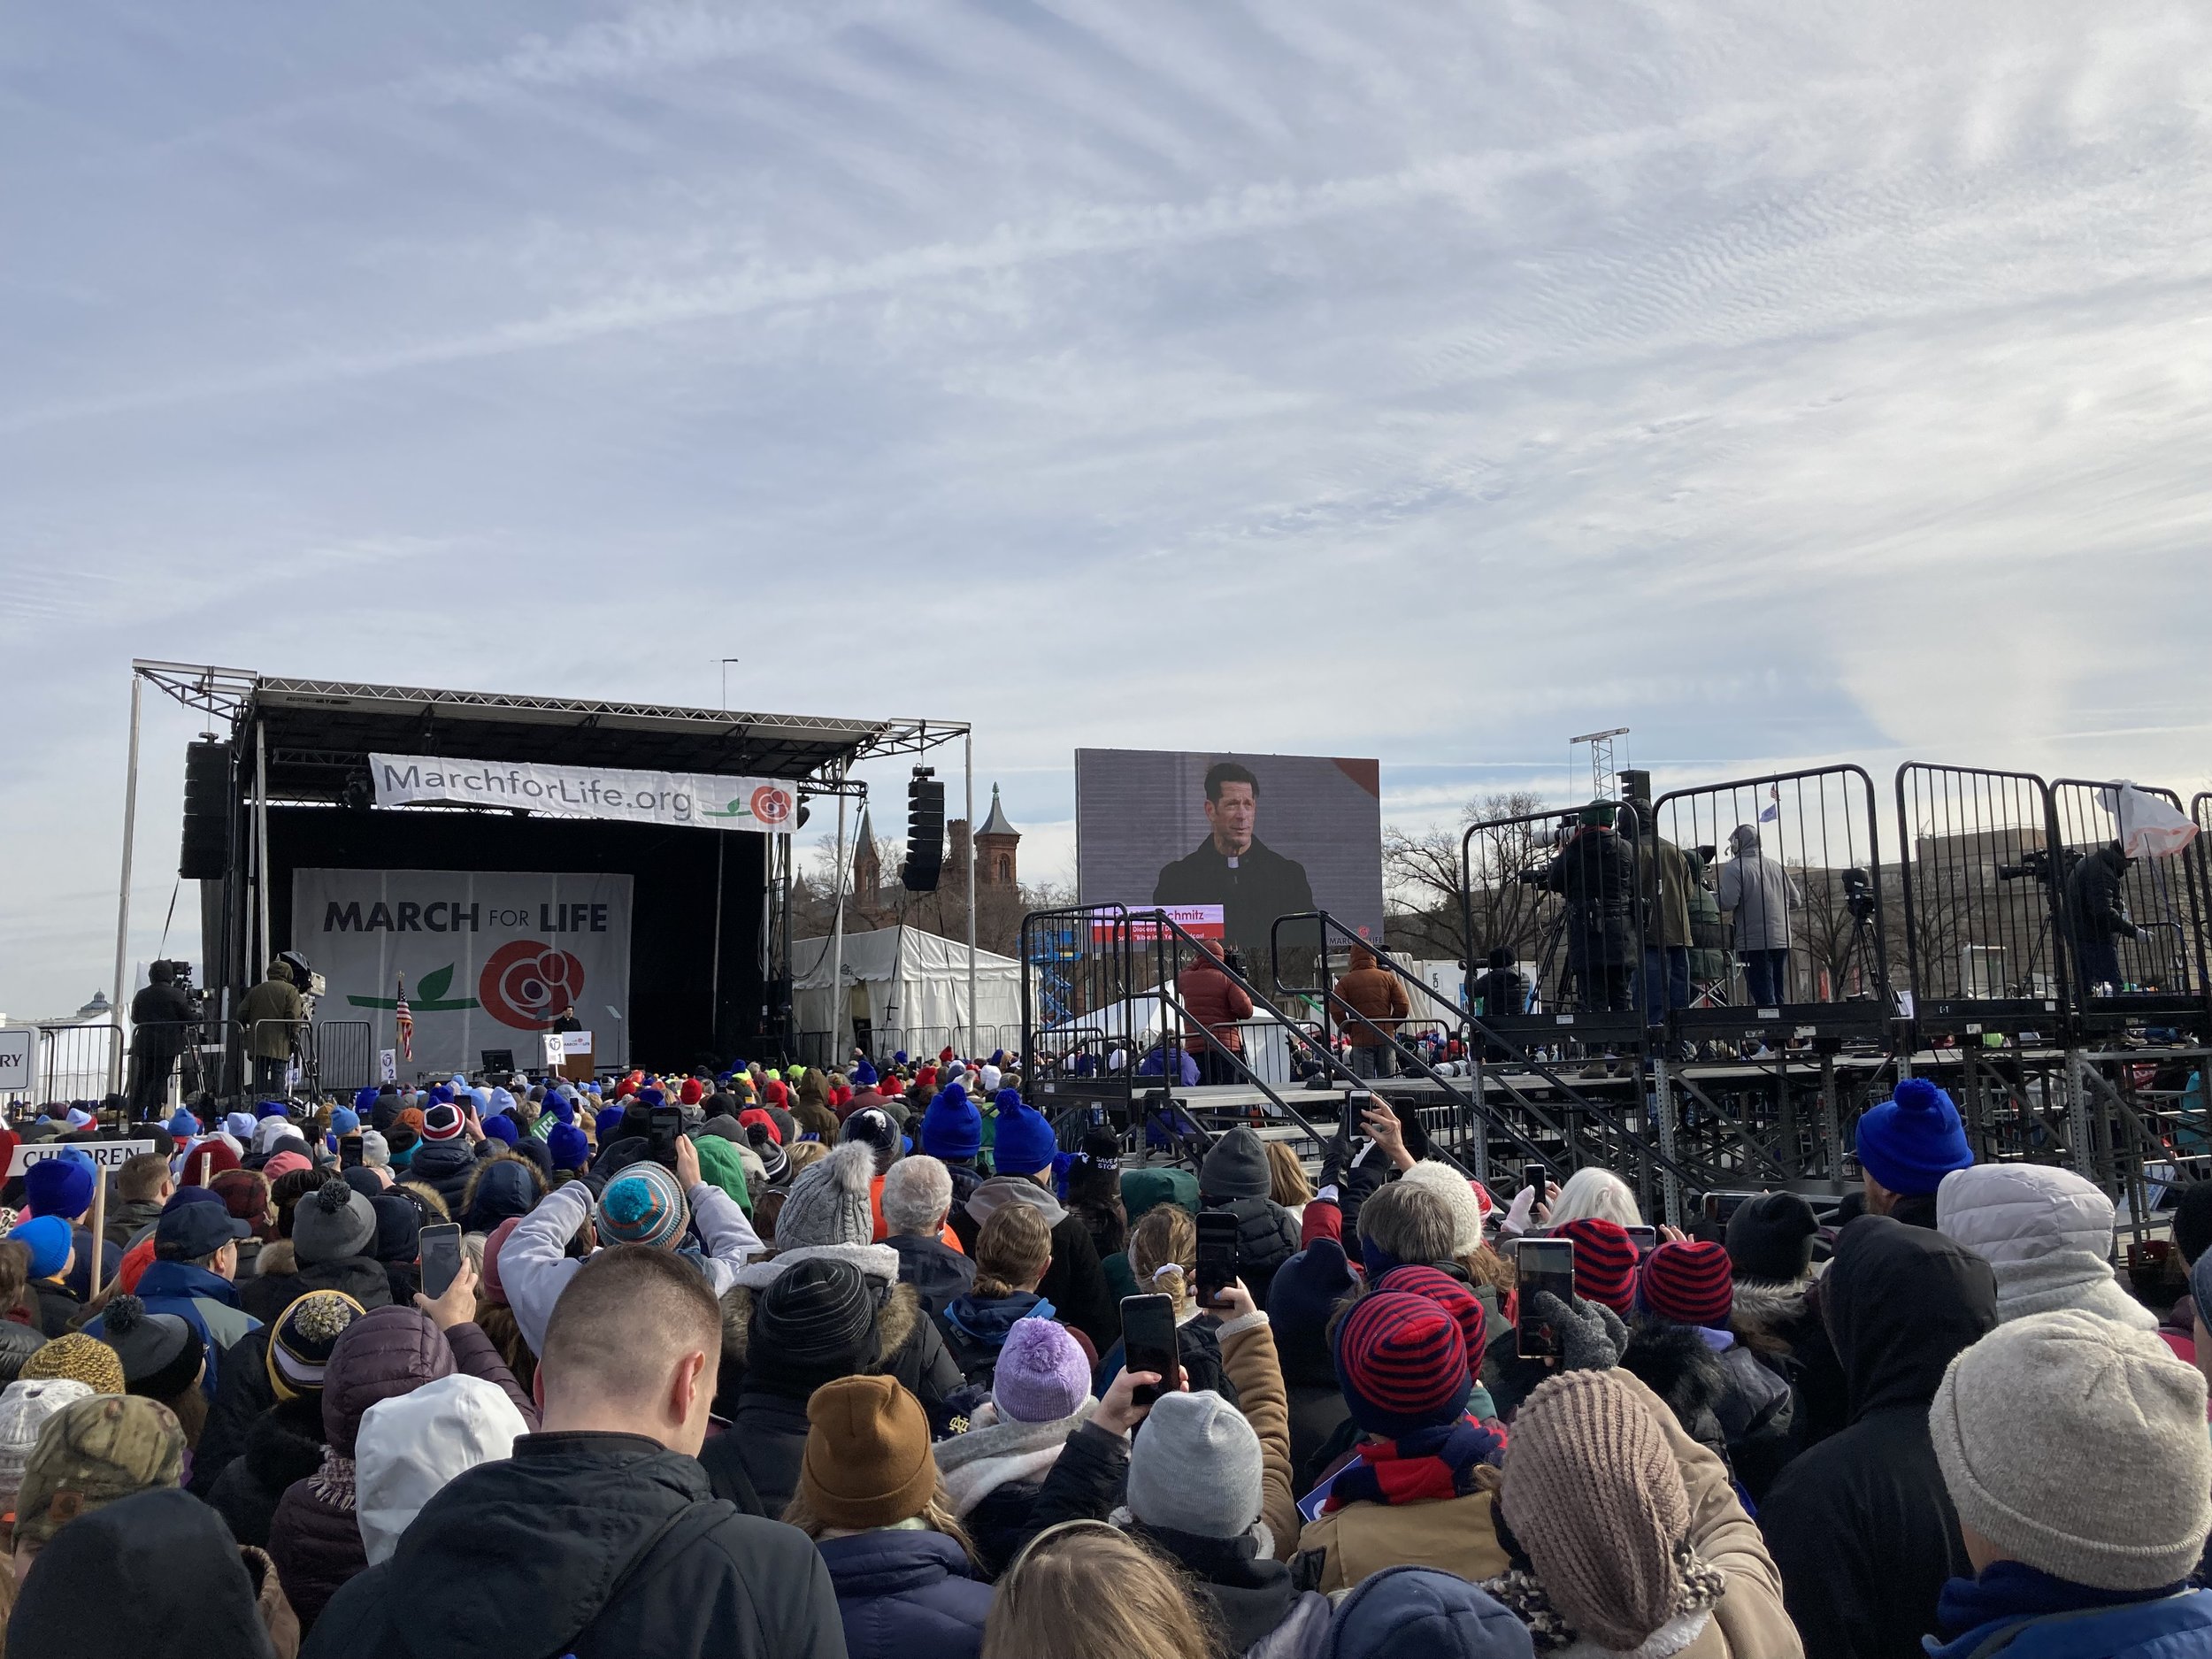 Fr. Mike Schmitz spoke at the rally before the March for Life